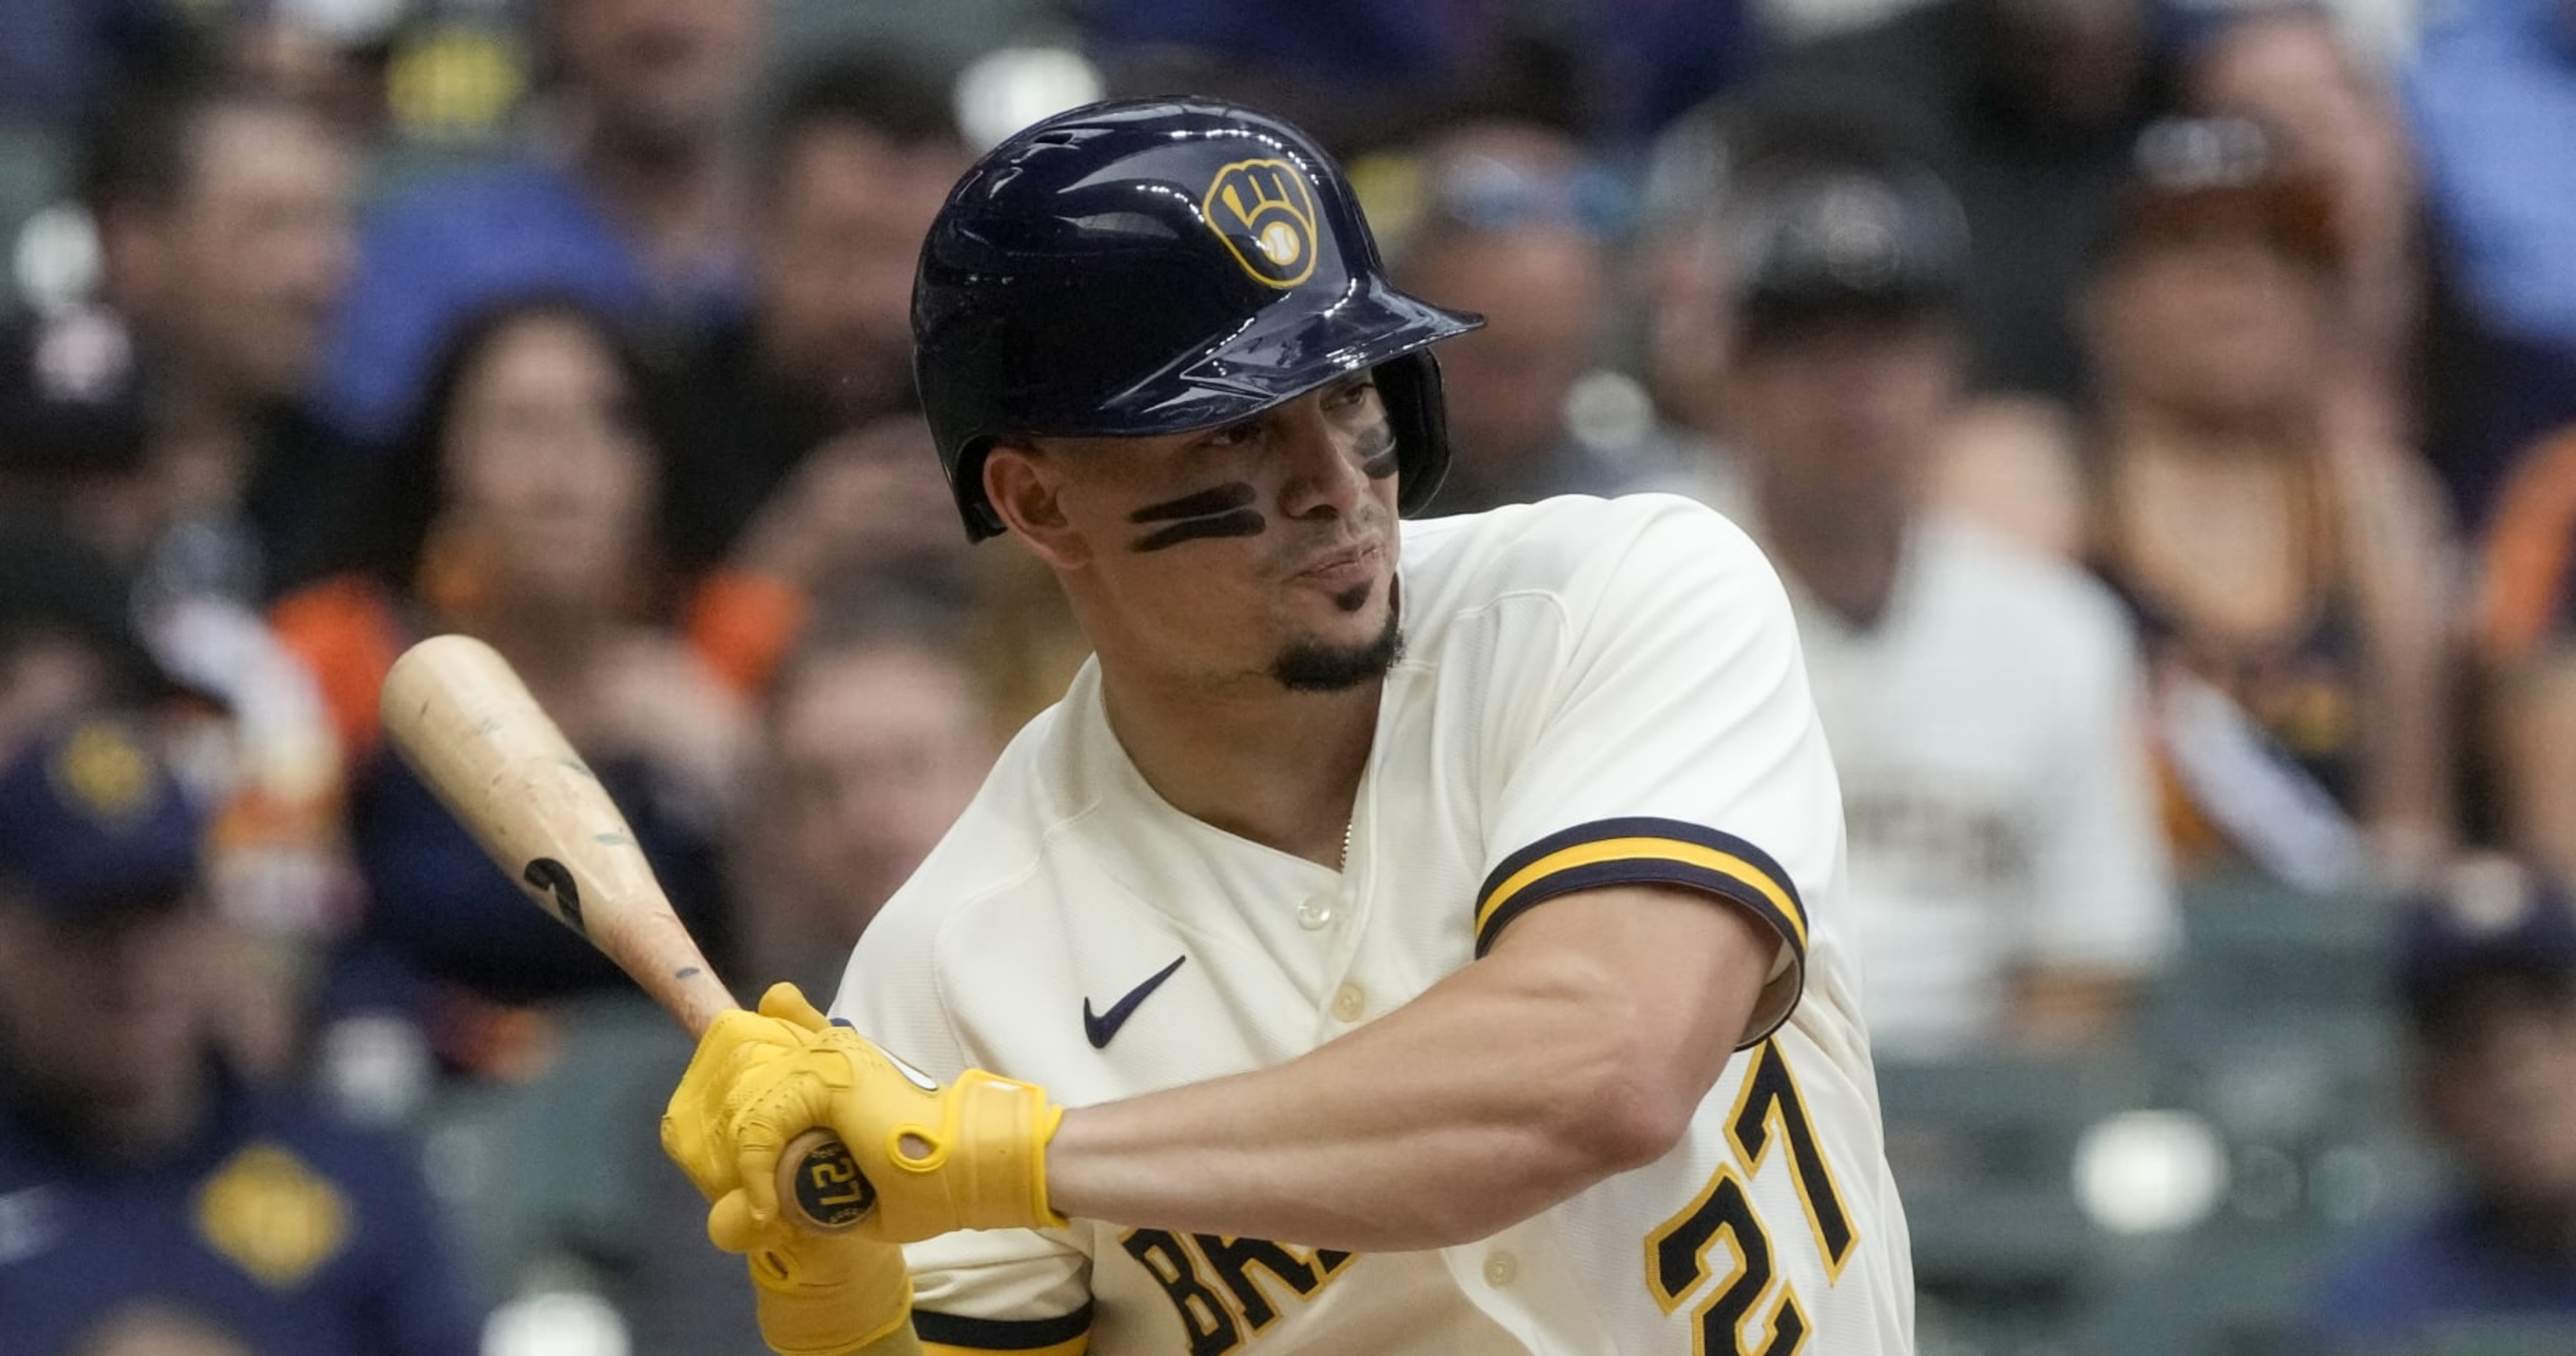 🚨WILLY ADAMES WITH A BASE HIT TO RIGHT FIELD 🚨 #brewers